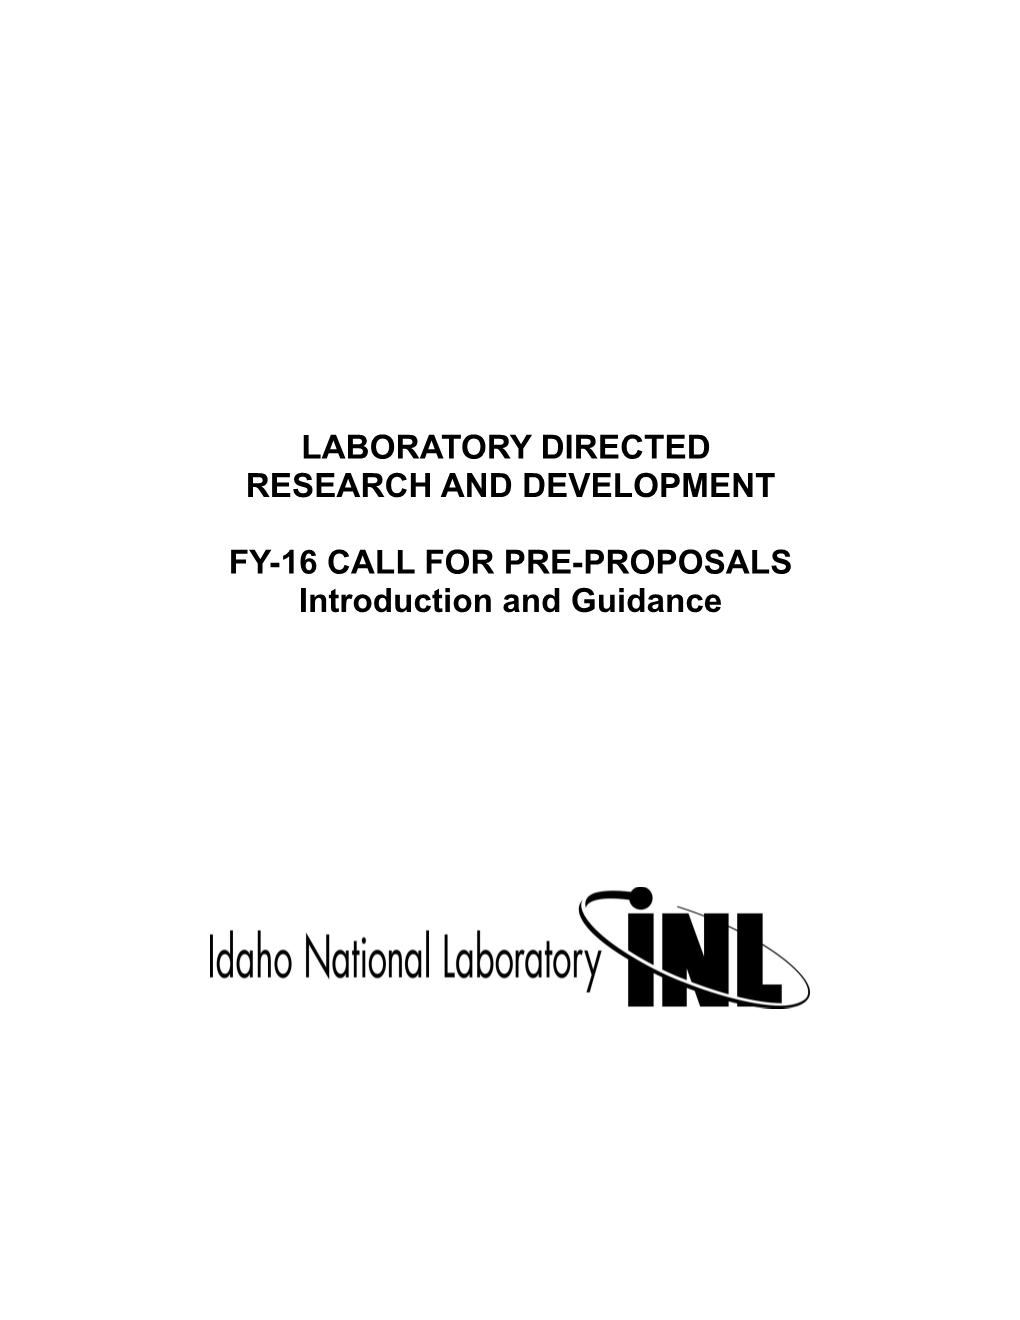 Fy 2009 Laboratory Directed